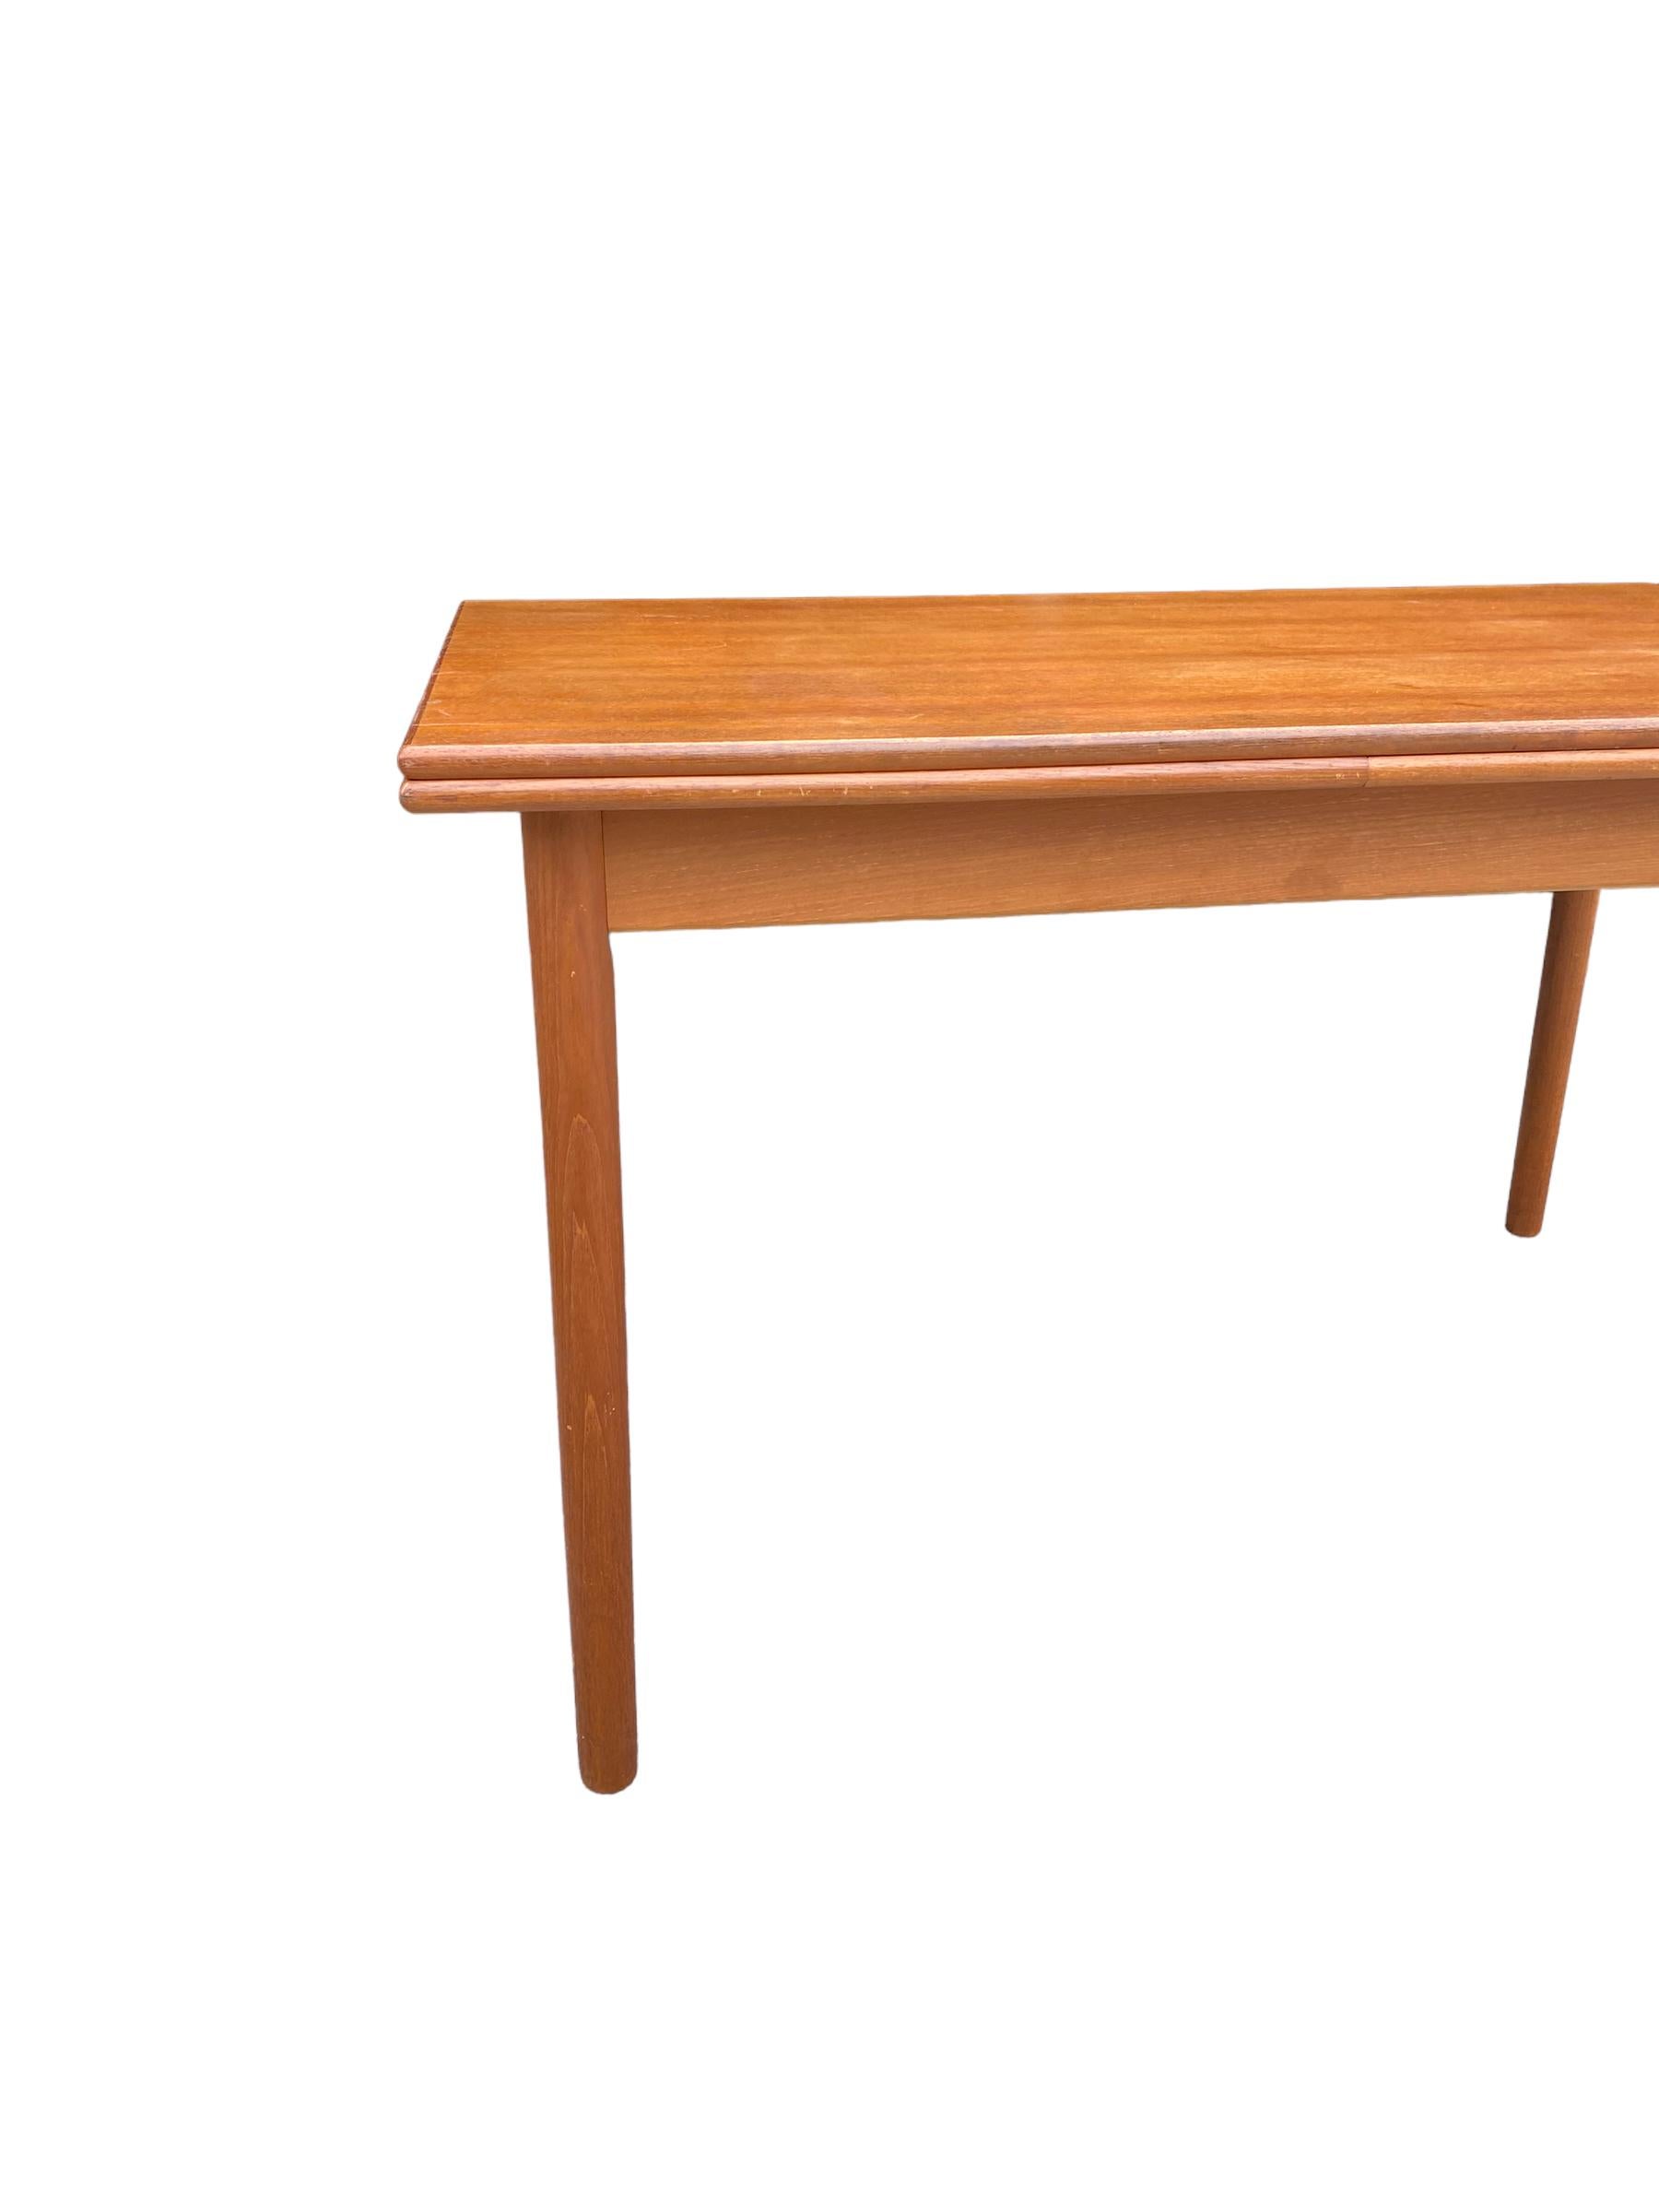 Danish modern dining table with two hidden draw leaf extensions. Teakwood in good condition with wear consistent with age and use. Stamped Made in Denmark by H. Sigh and Sons.